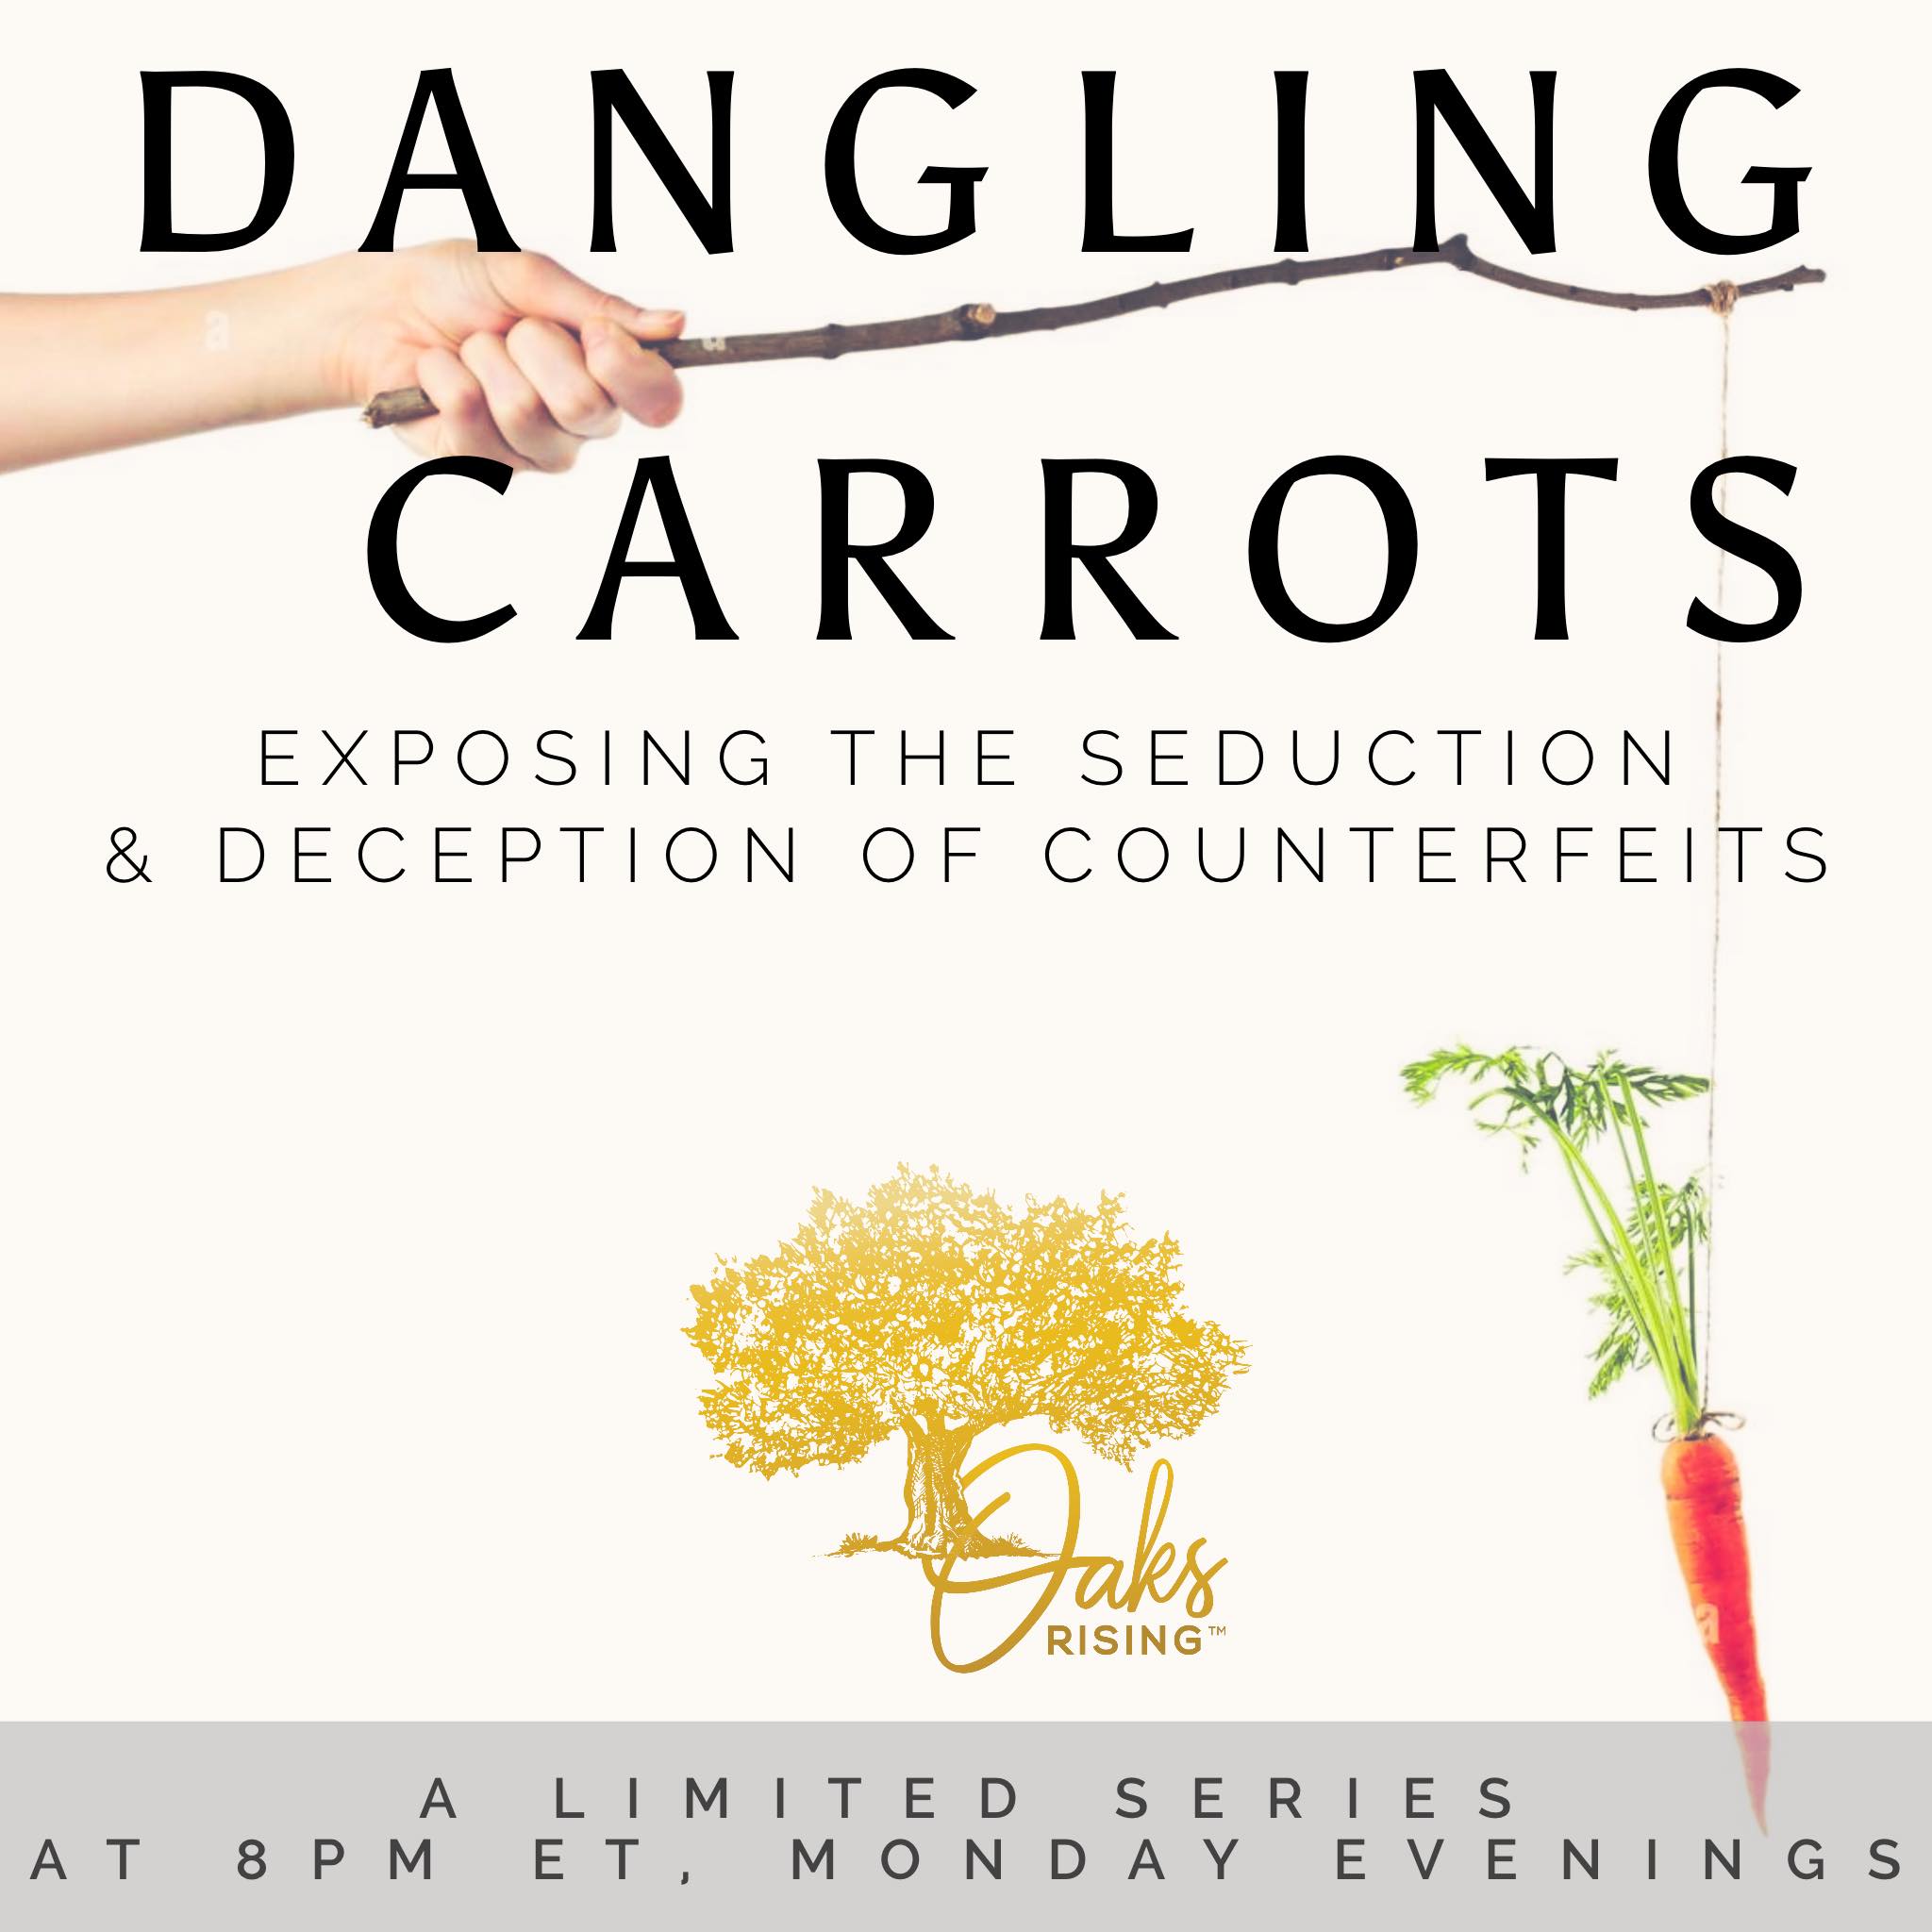 Dangling Carrots: Exposing The Seduction & Deception of Counterfeits